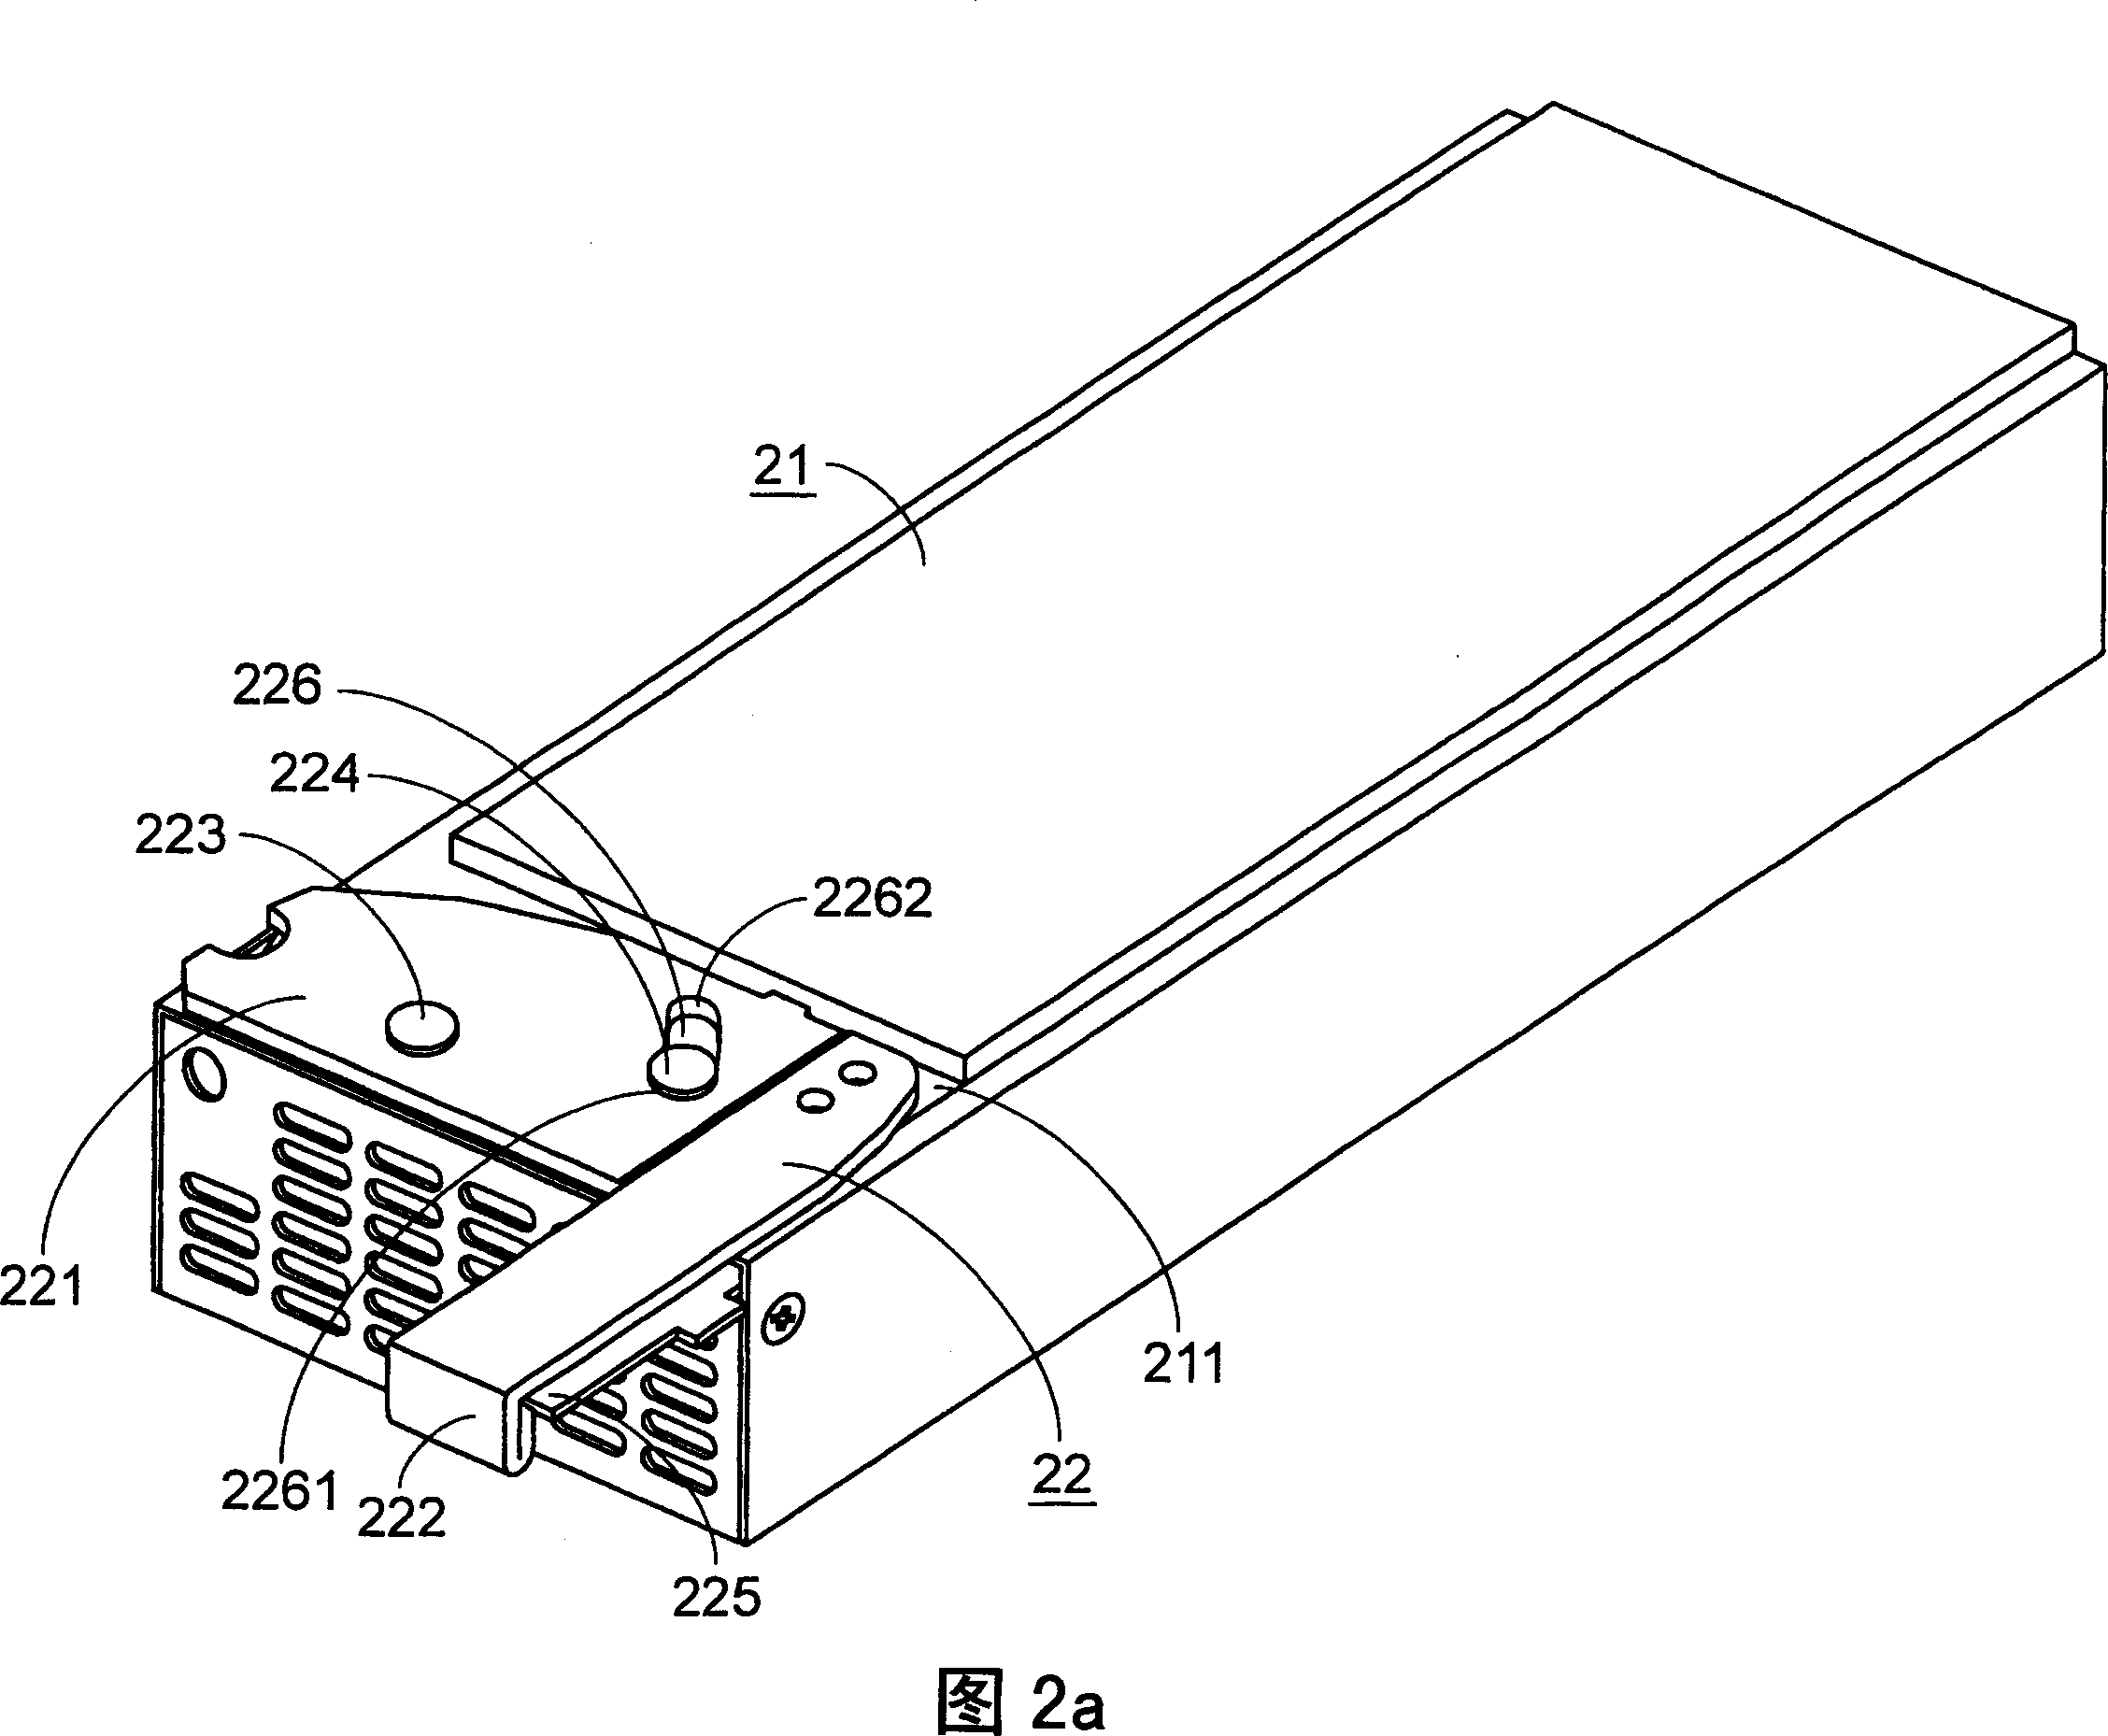 Drawer electronic device with handle